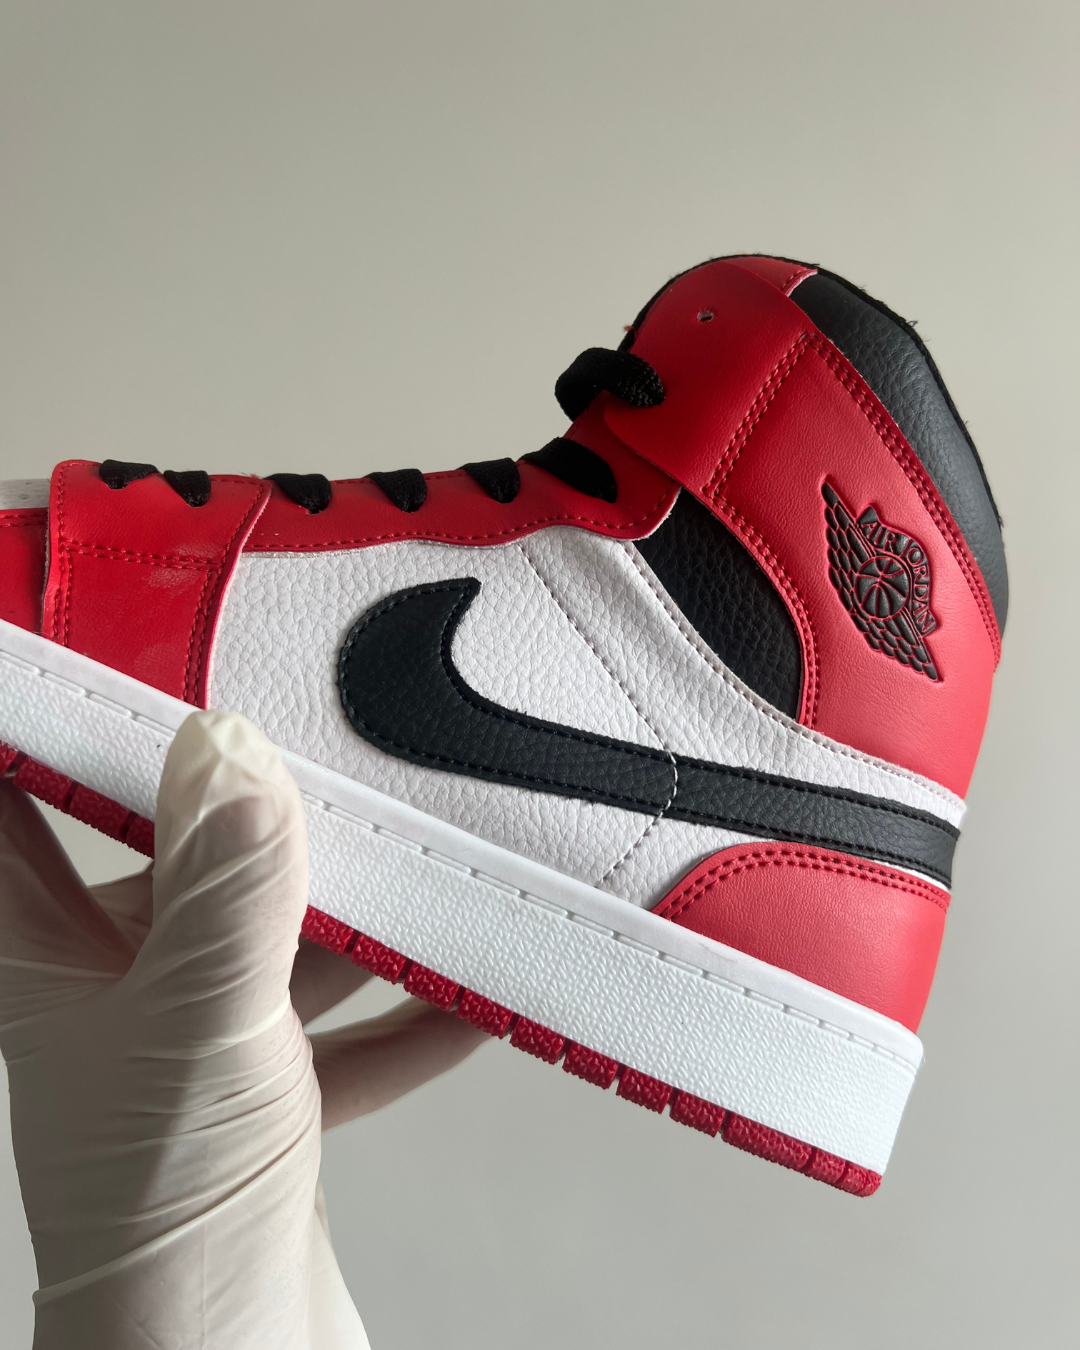 Air Jordan 1 Lost and Found Edition